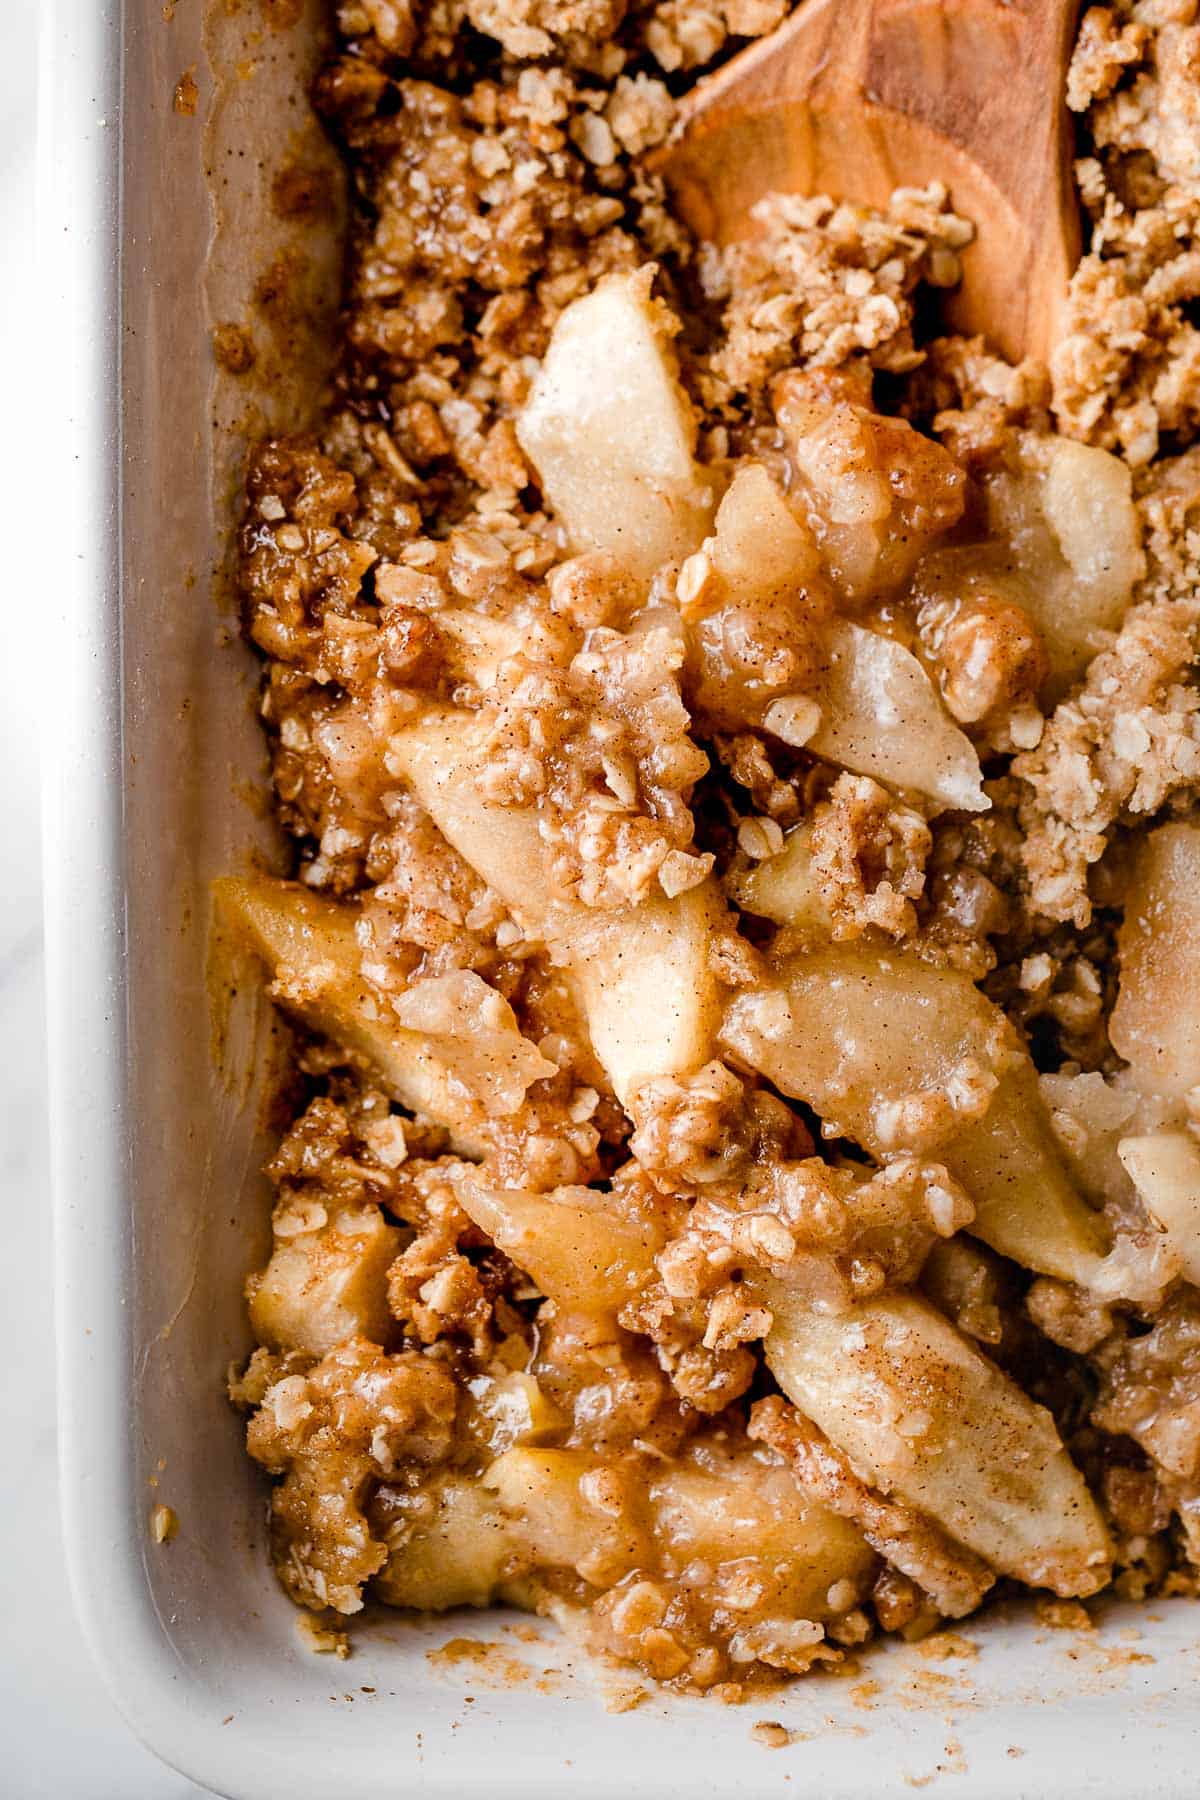 A baking dish with baked apple crisp and a serving spoon.